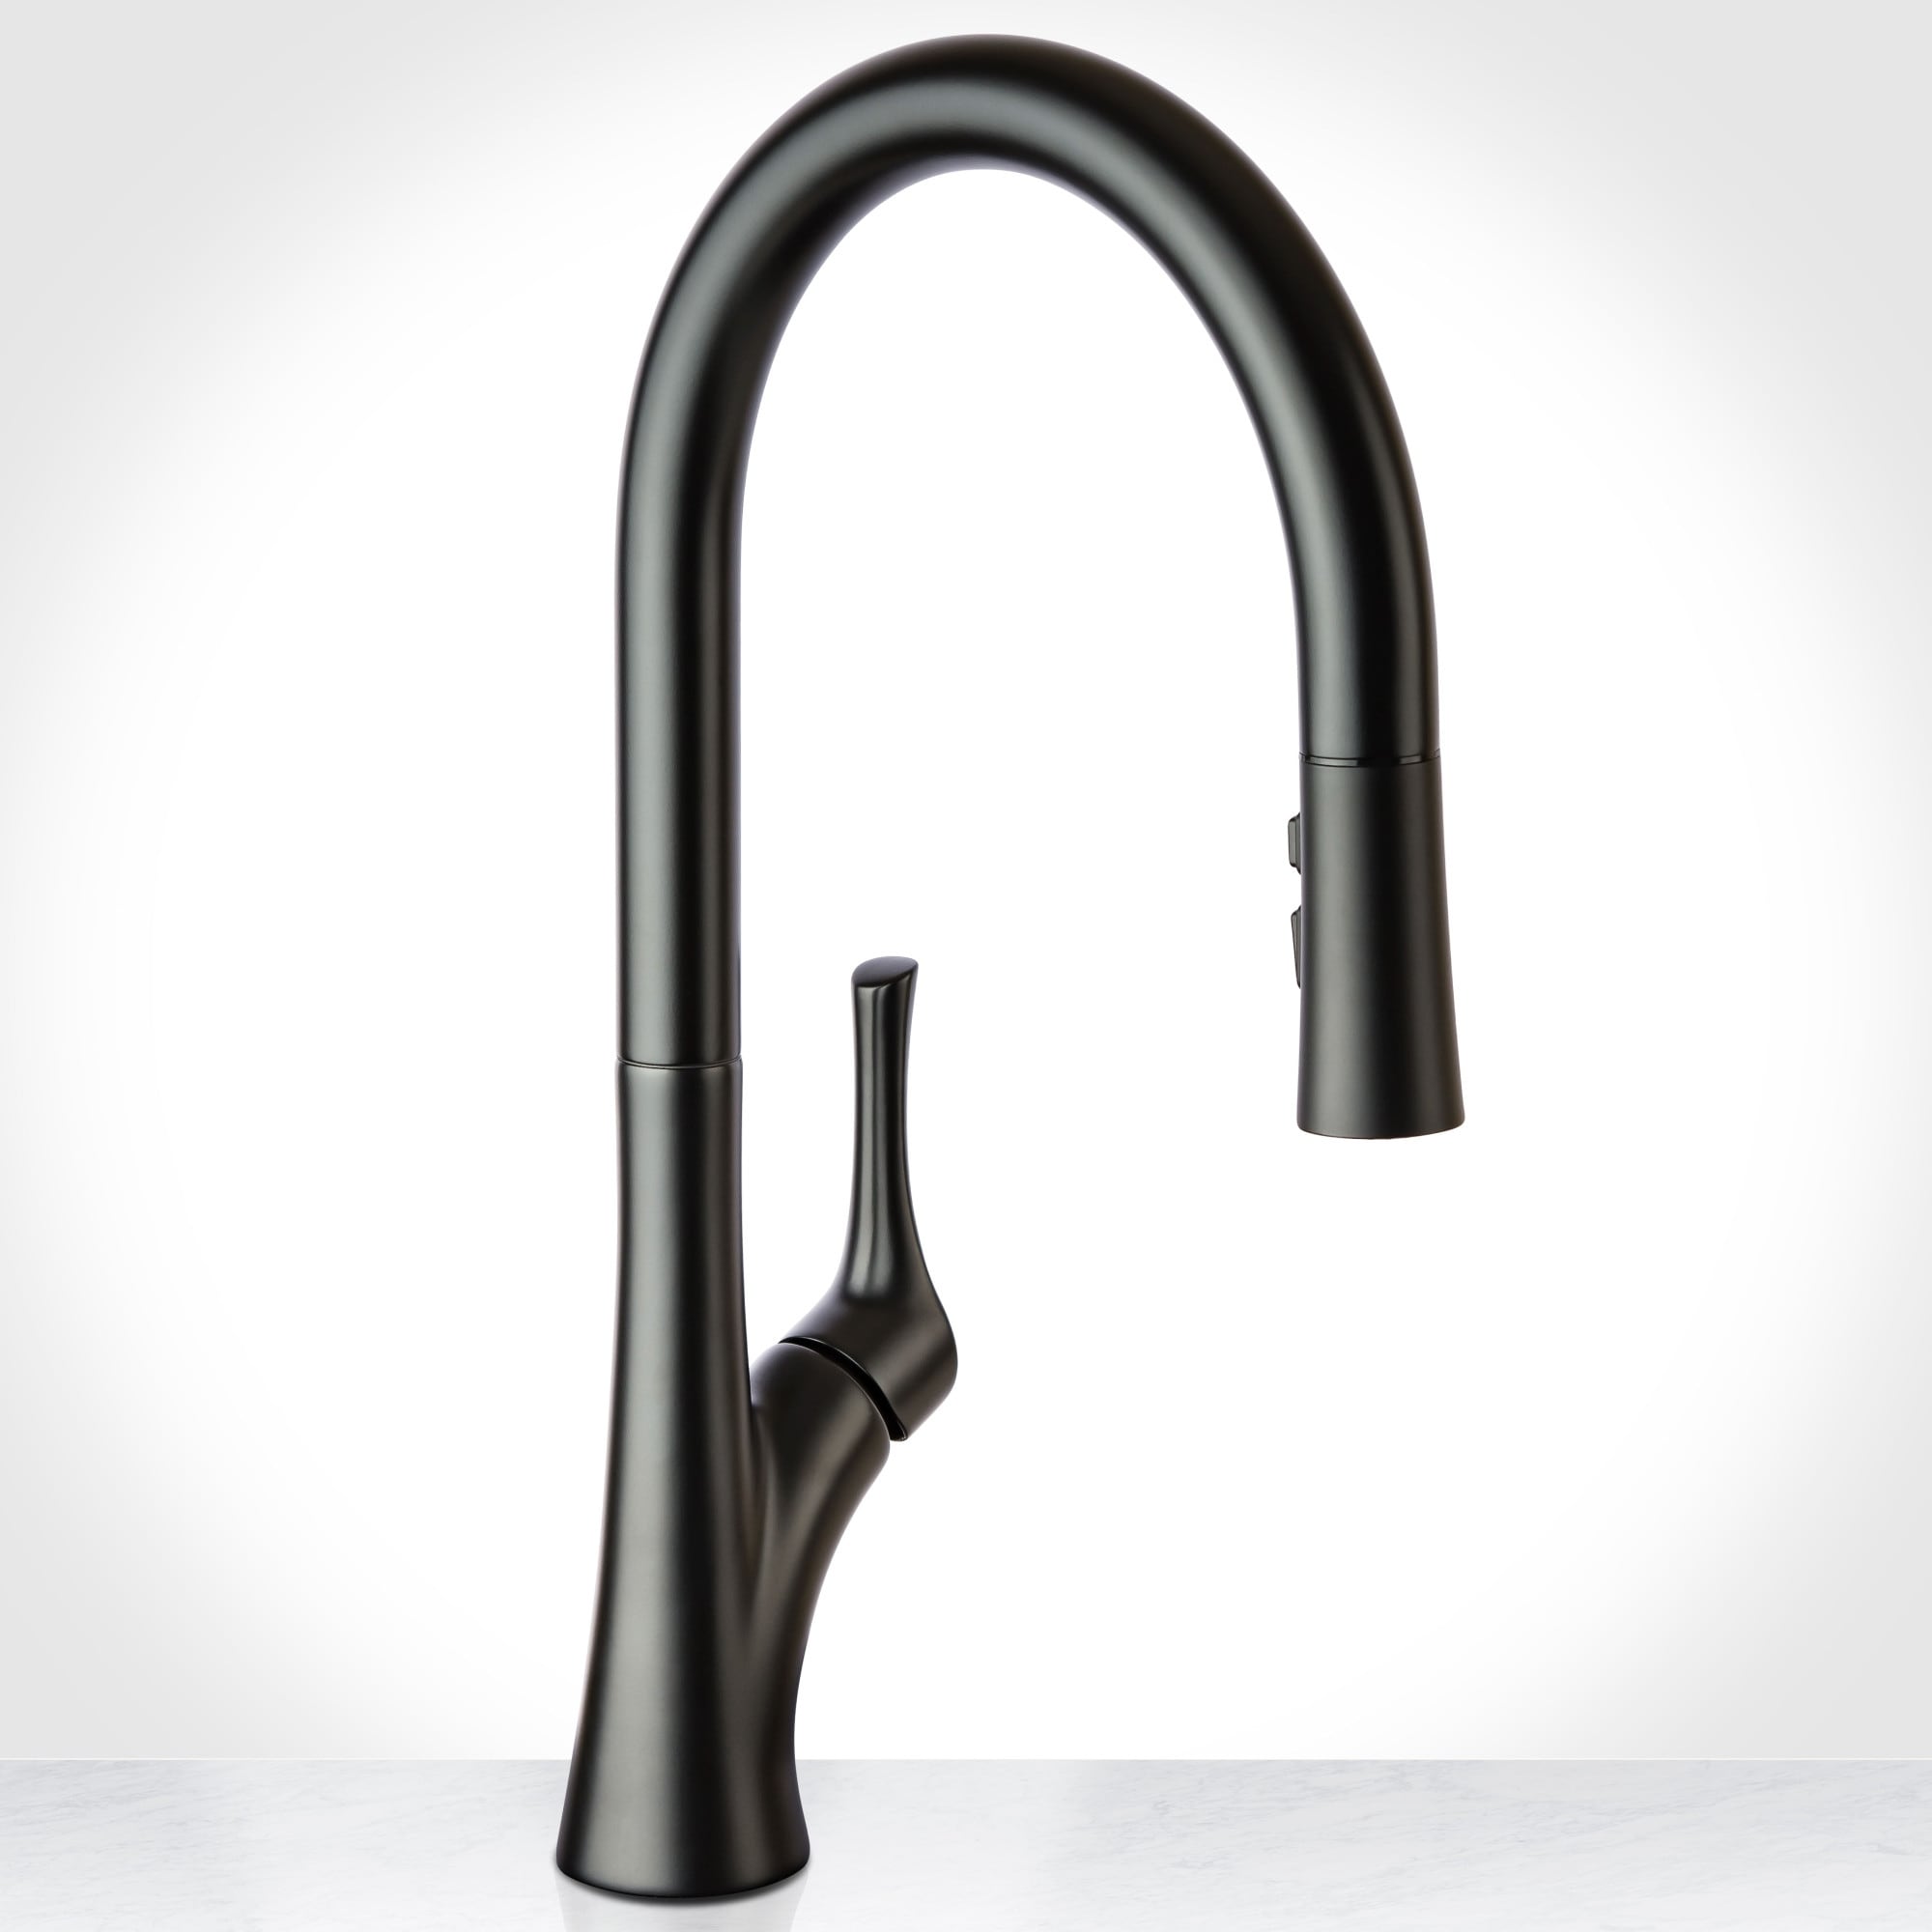 Shop Miseno Mk171 Bella 1 8 Gpm Pull Down Kitchen Faucet With Easy